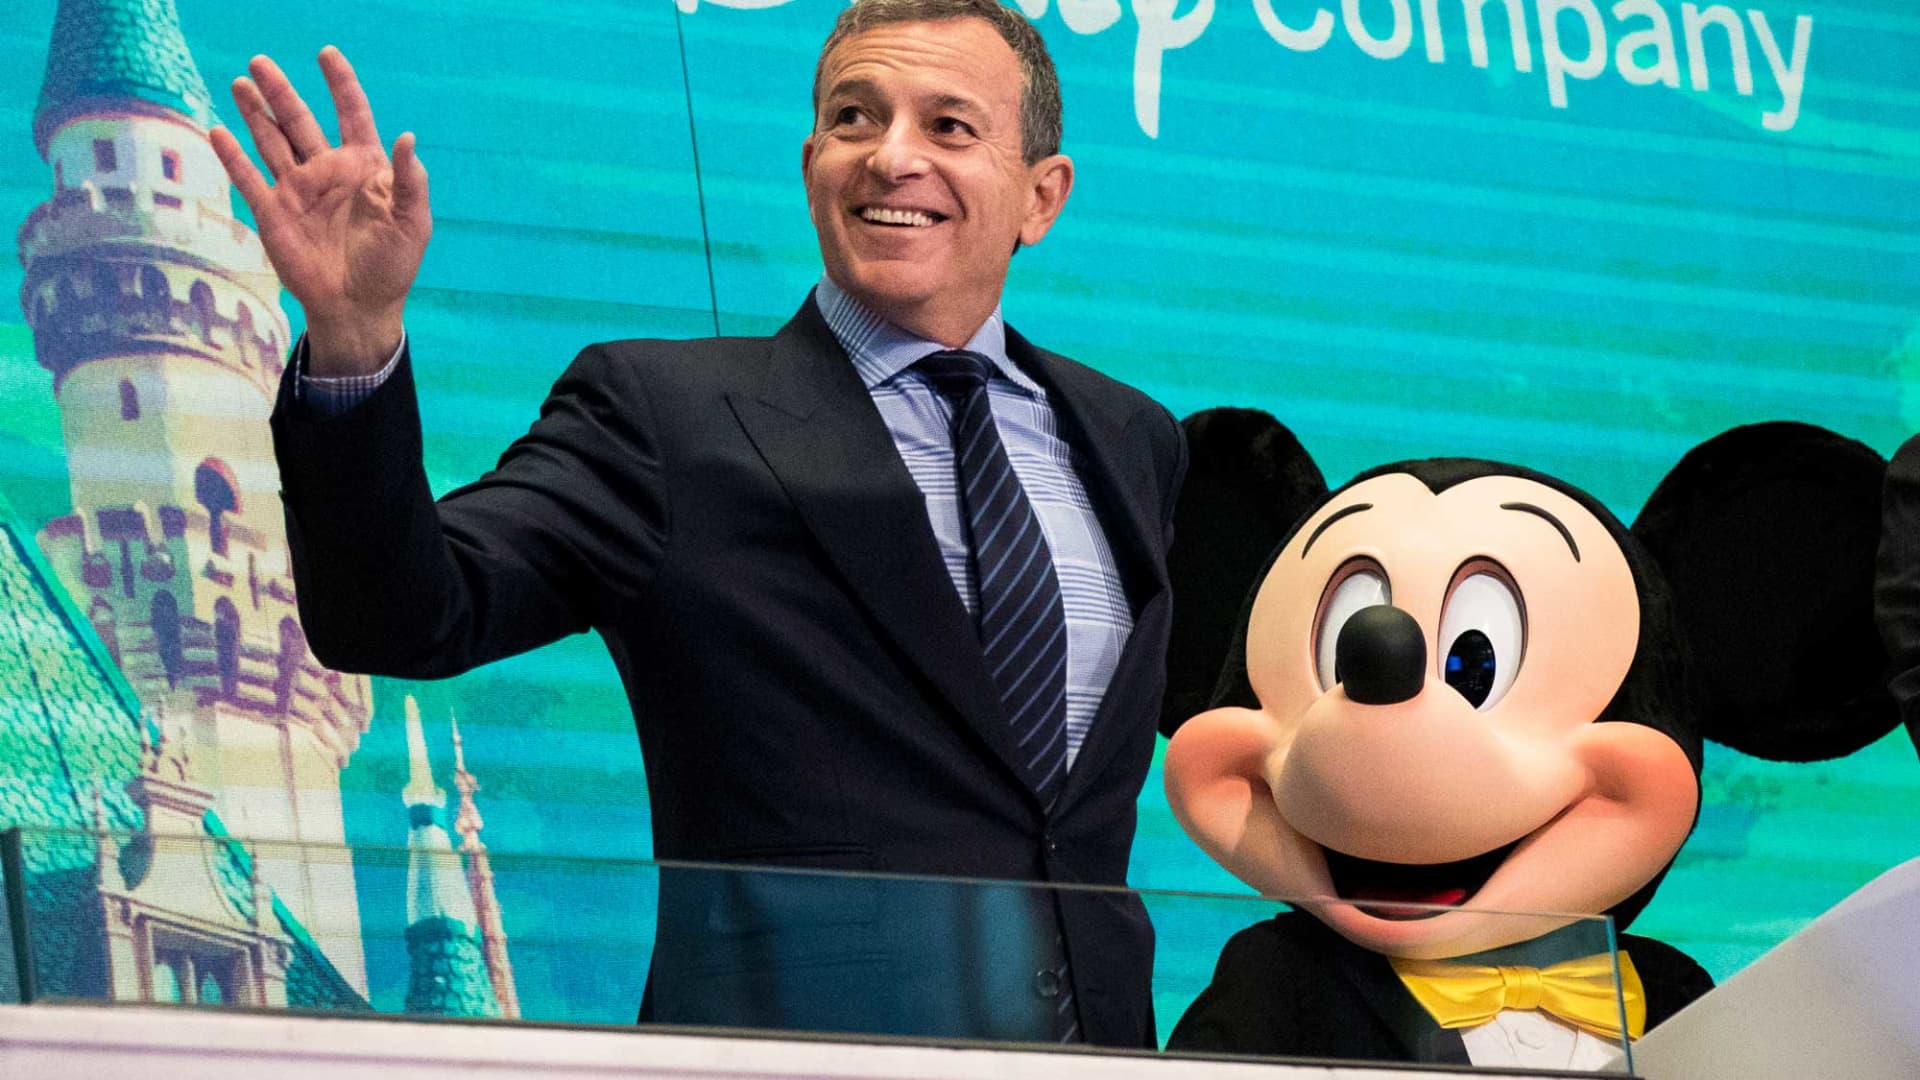 Disney asset gross sales will not break the financial institution, however they are going to transfer legacy media ahead